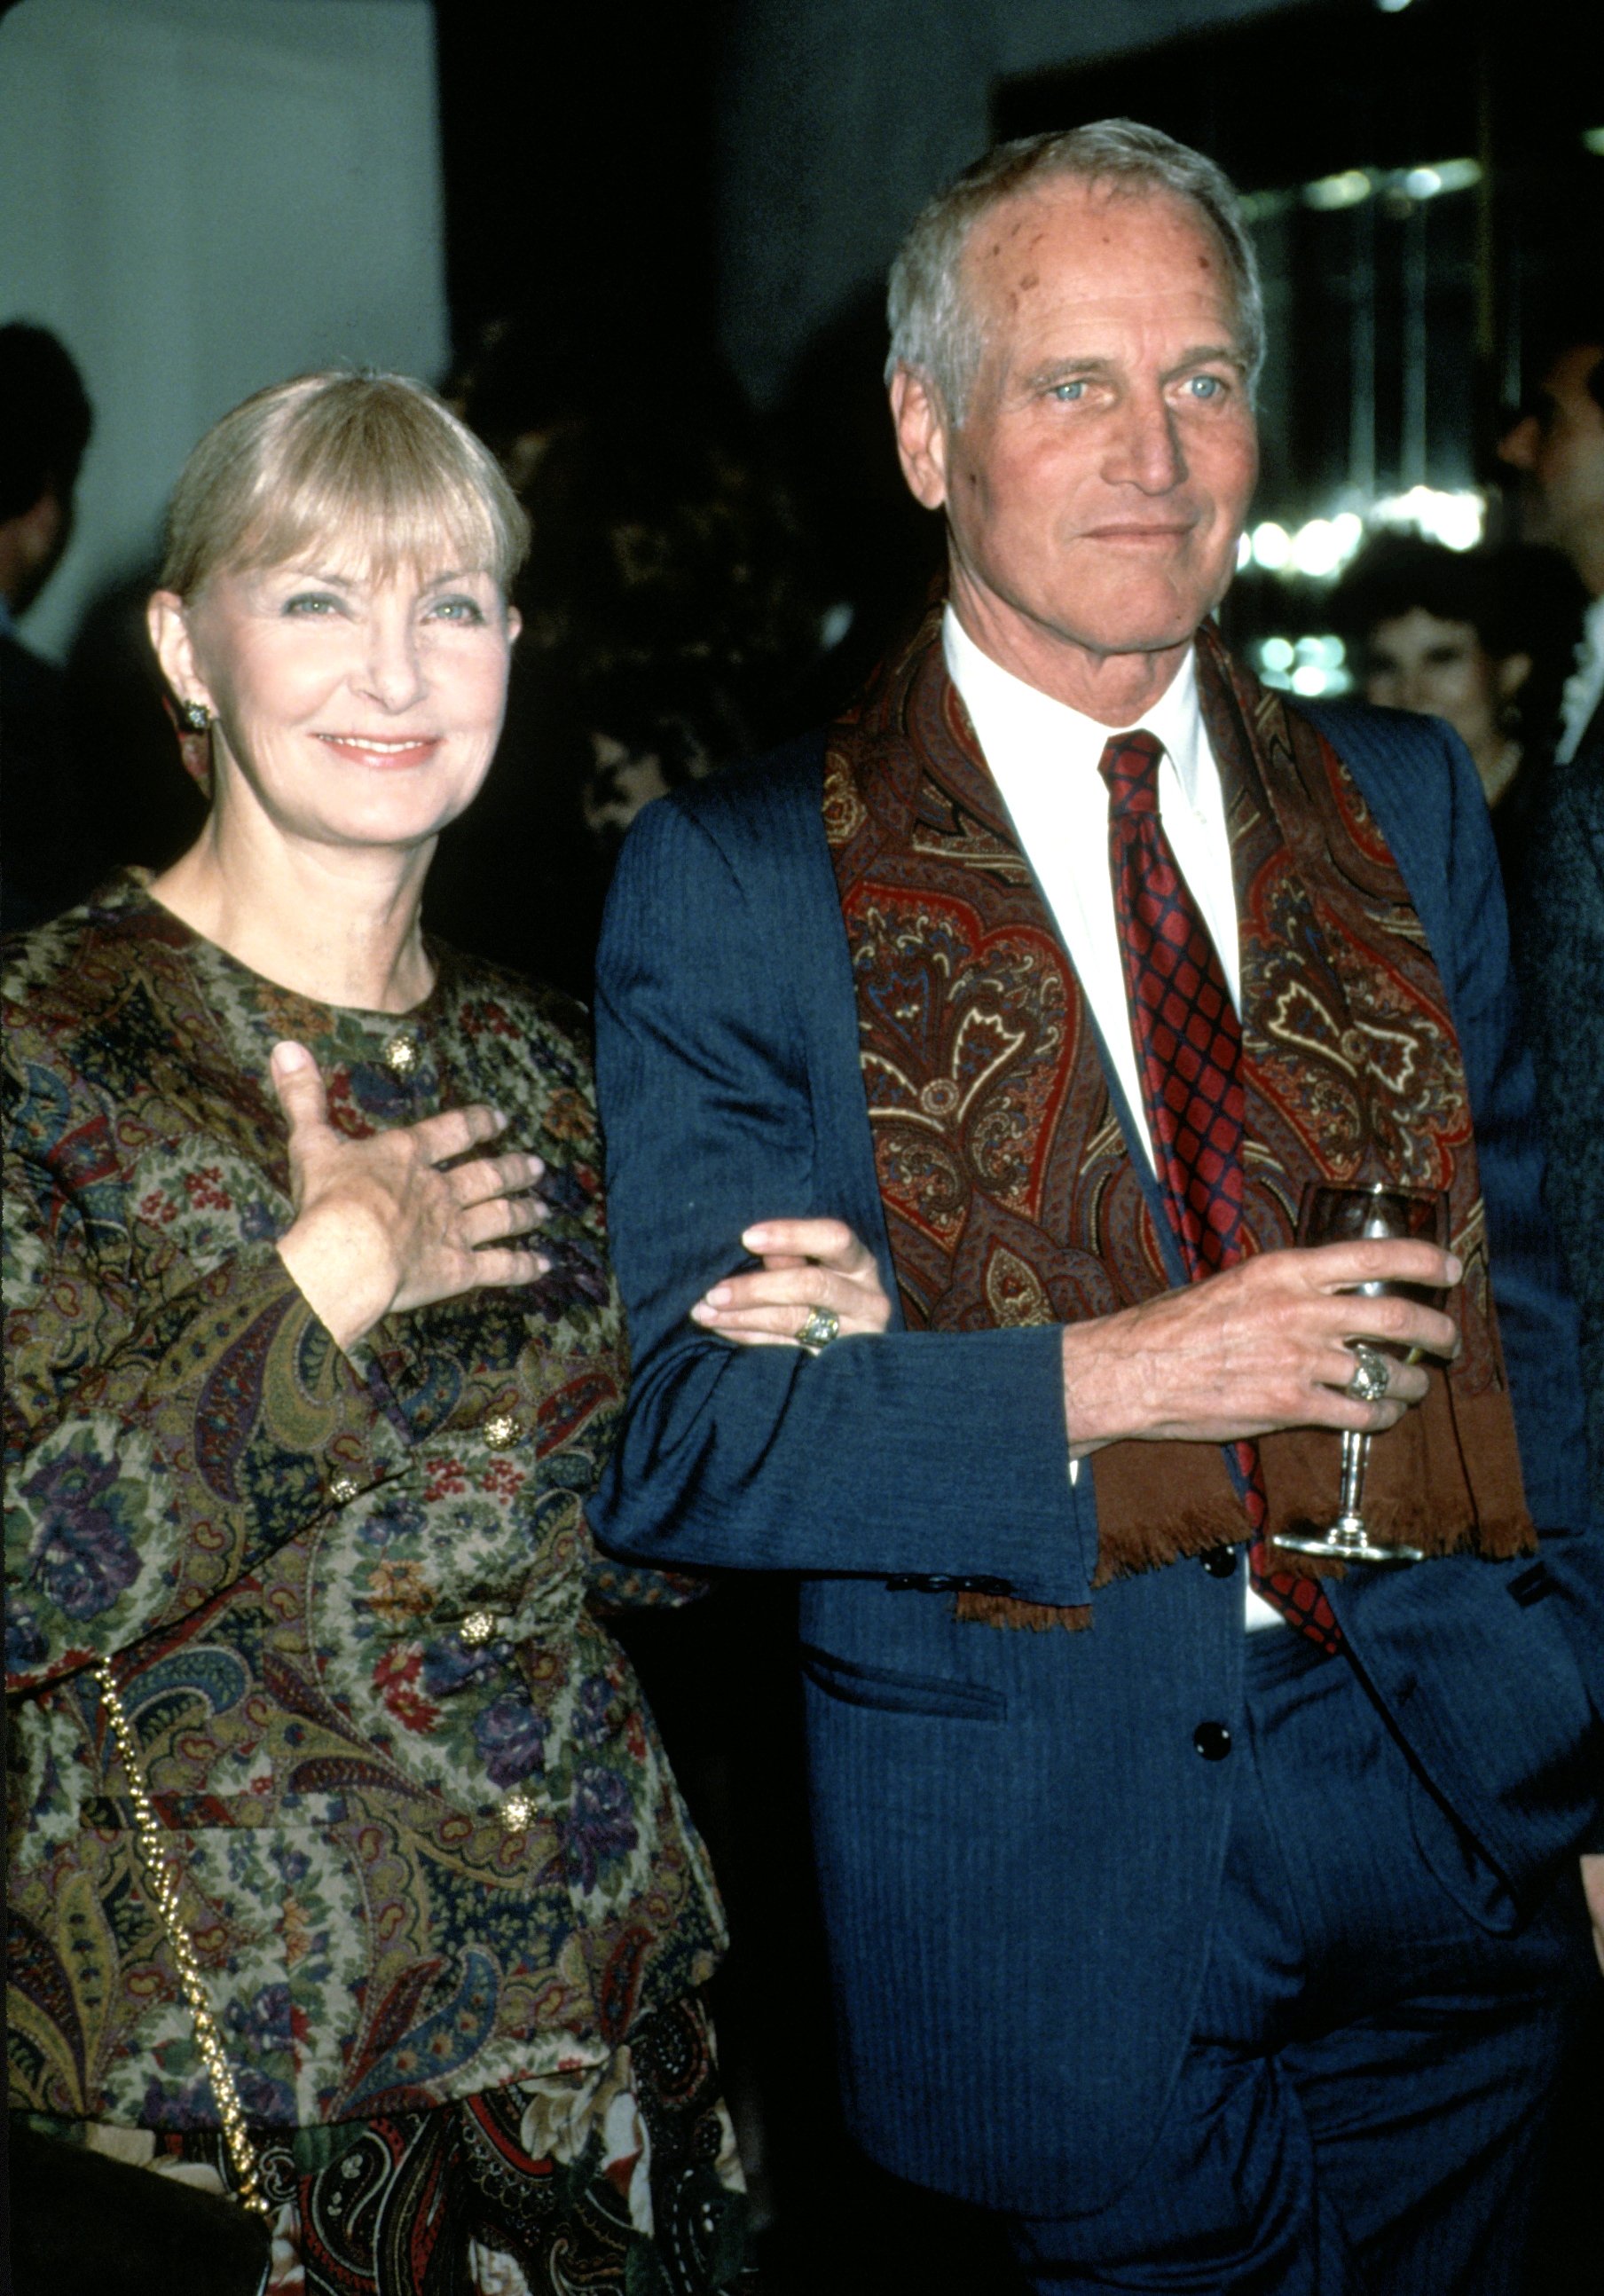 Joan Woodward und Paul Newman um 1992 in New York City. | Quelle: Getty Images